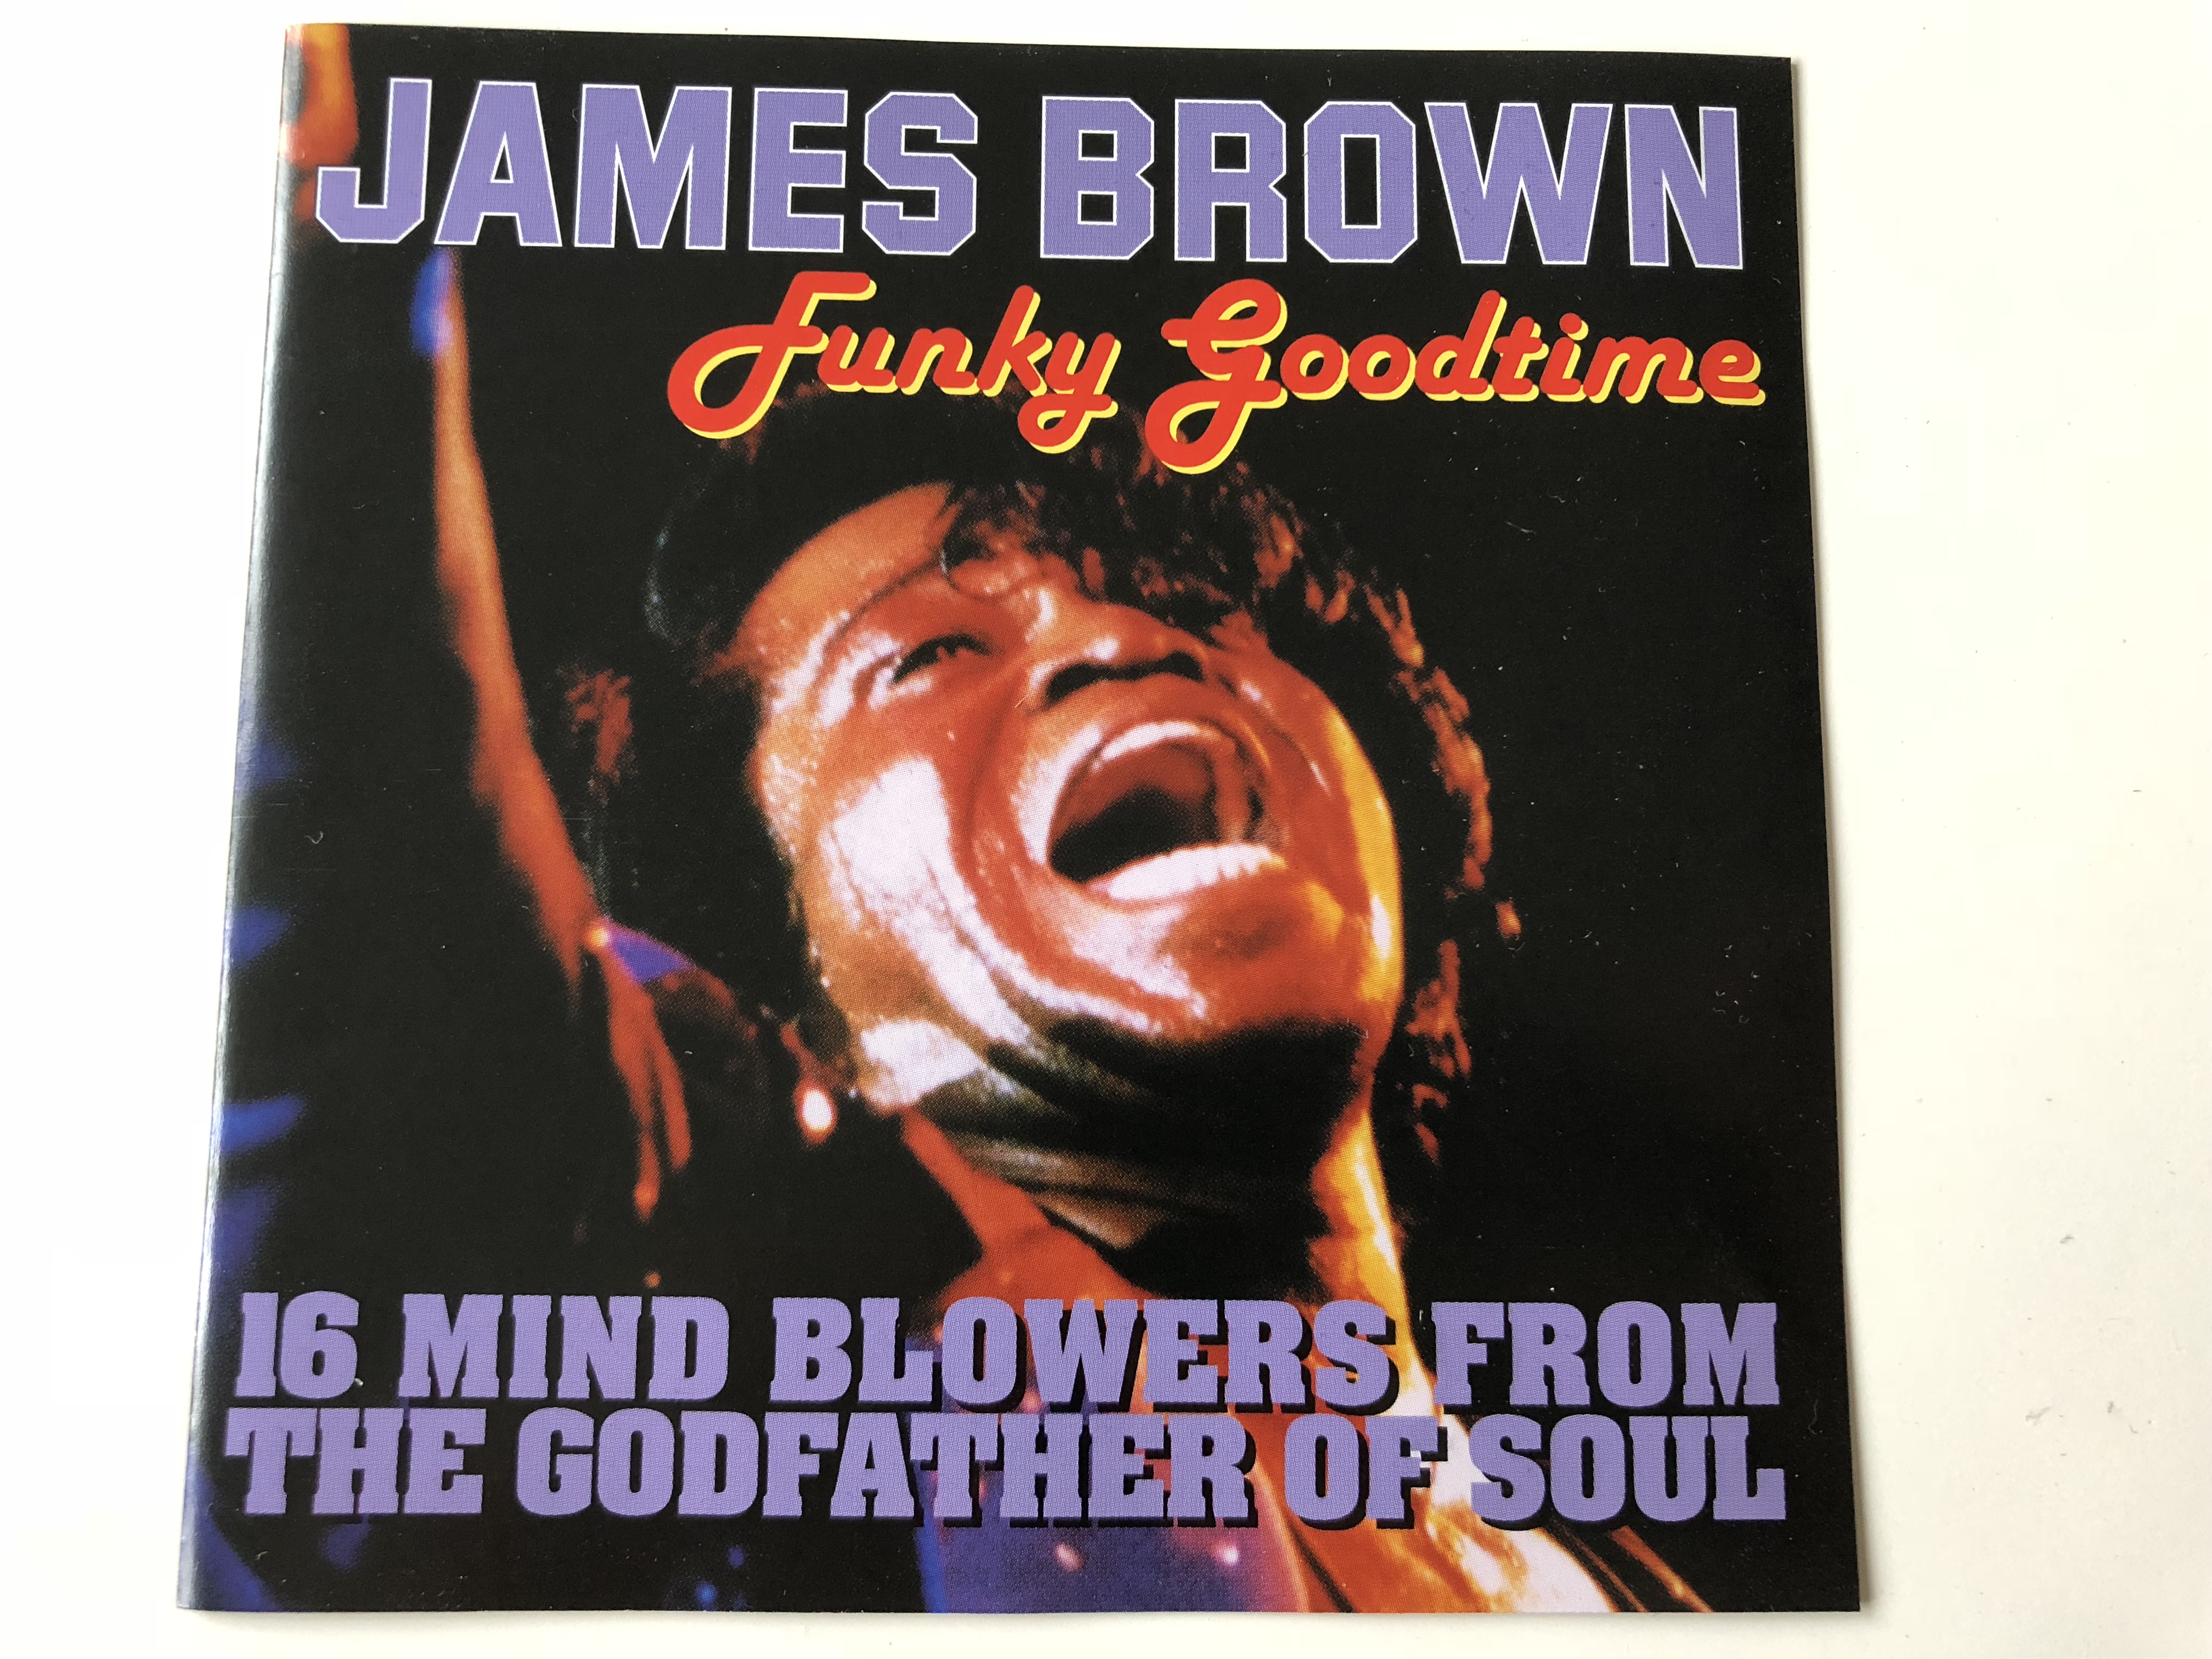 james-brown-funky-goodtime-16-mind-blowers-from-the-godfather-of-soul-audio-cd-1996-prism-leisure-platcd-153-1-.jpg